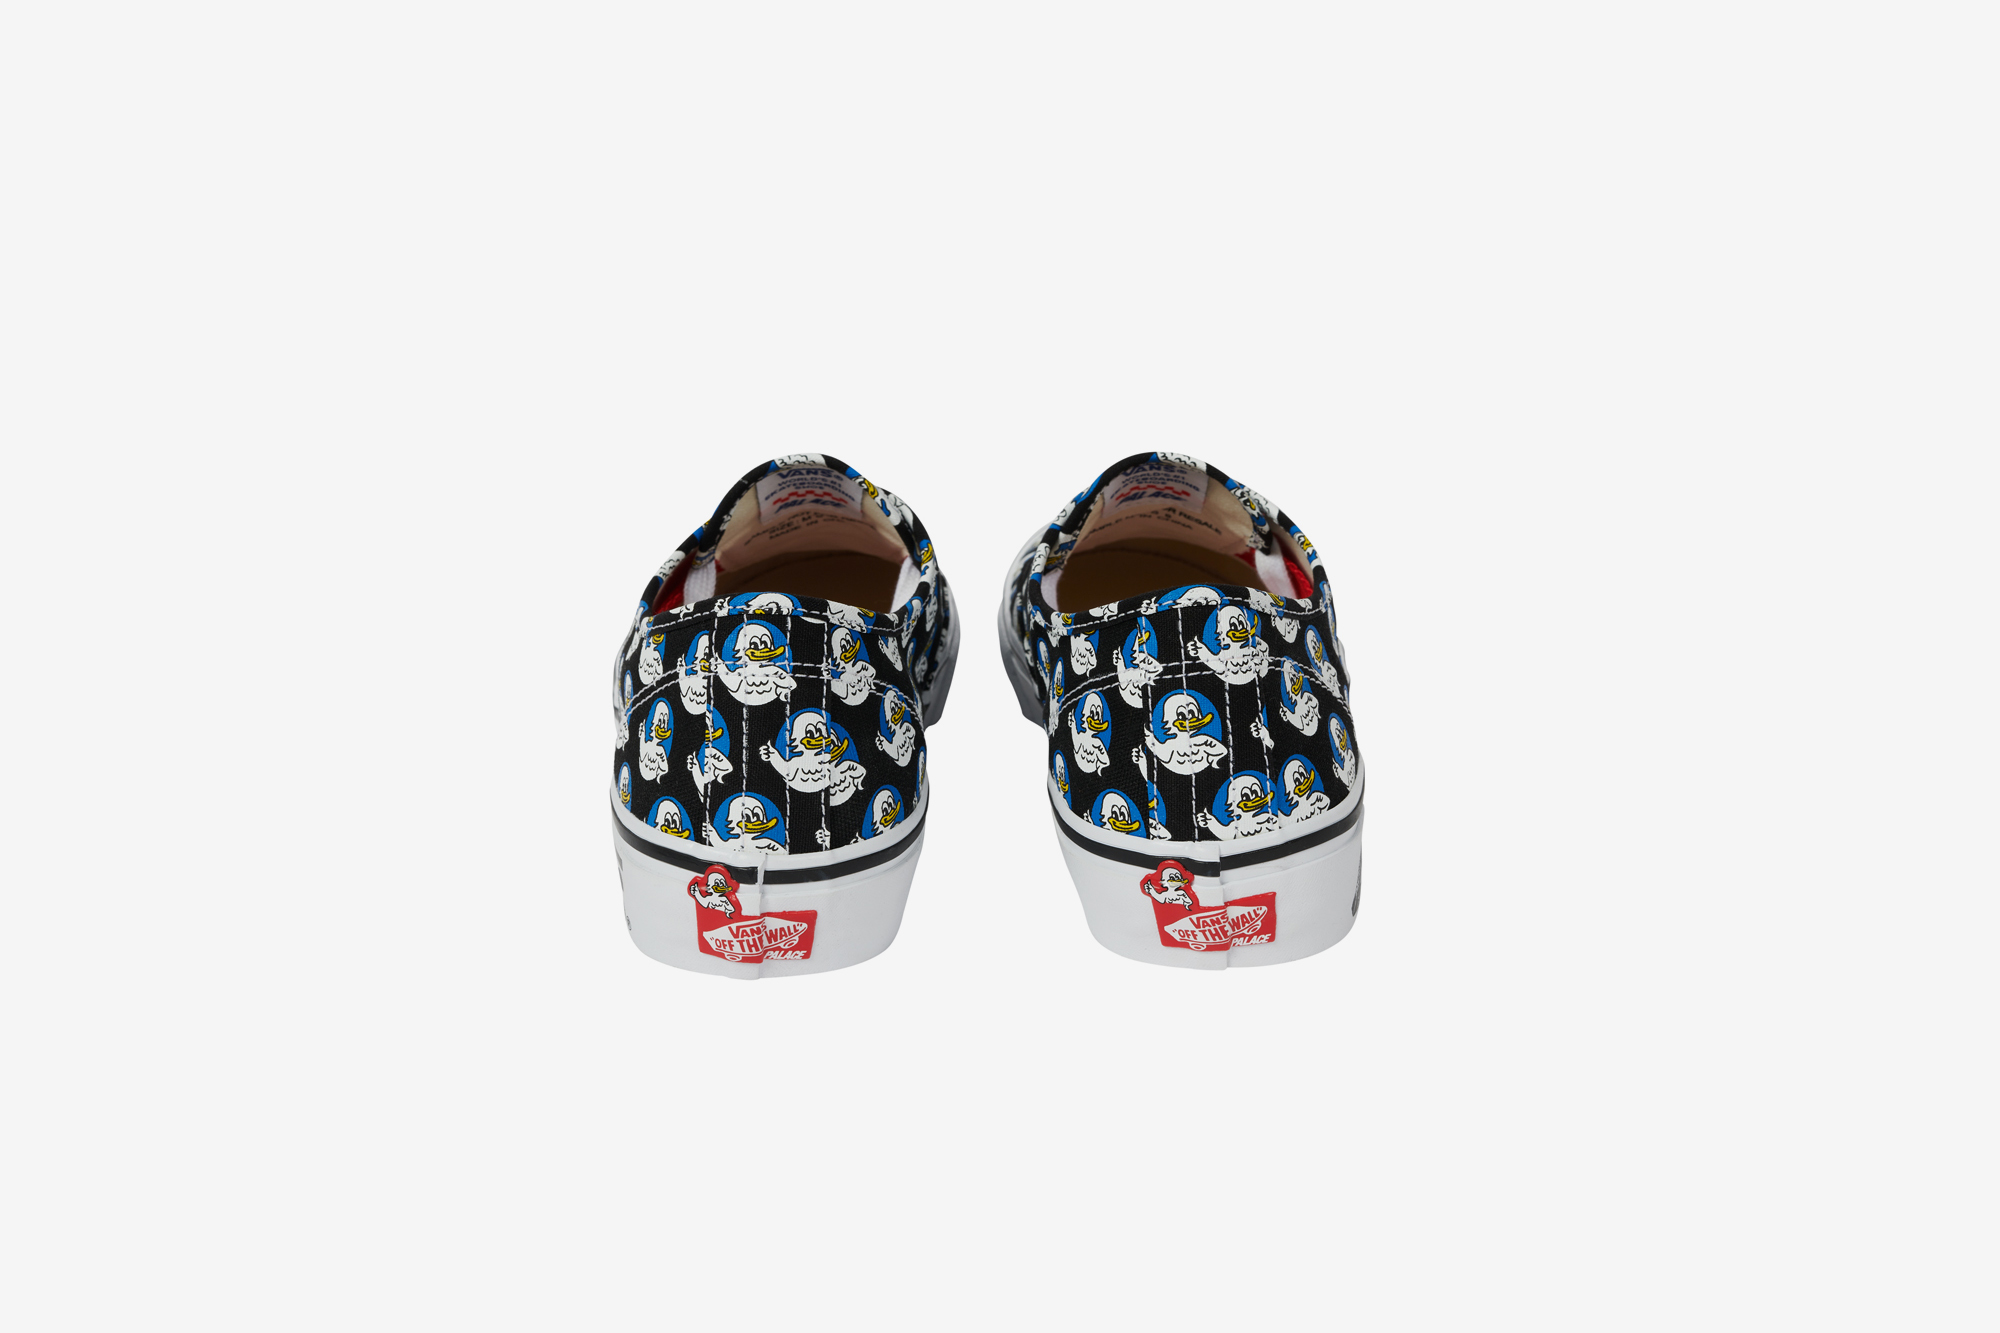 palace-vans-skate-authentic-release-date-price-1-06